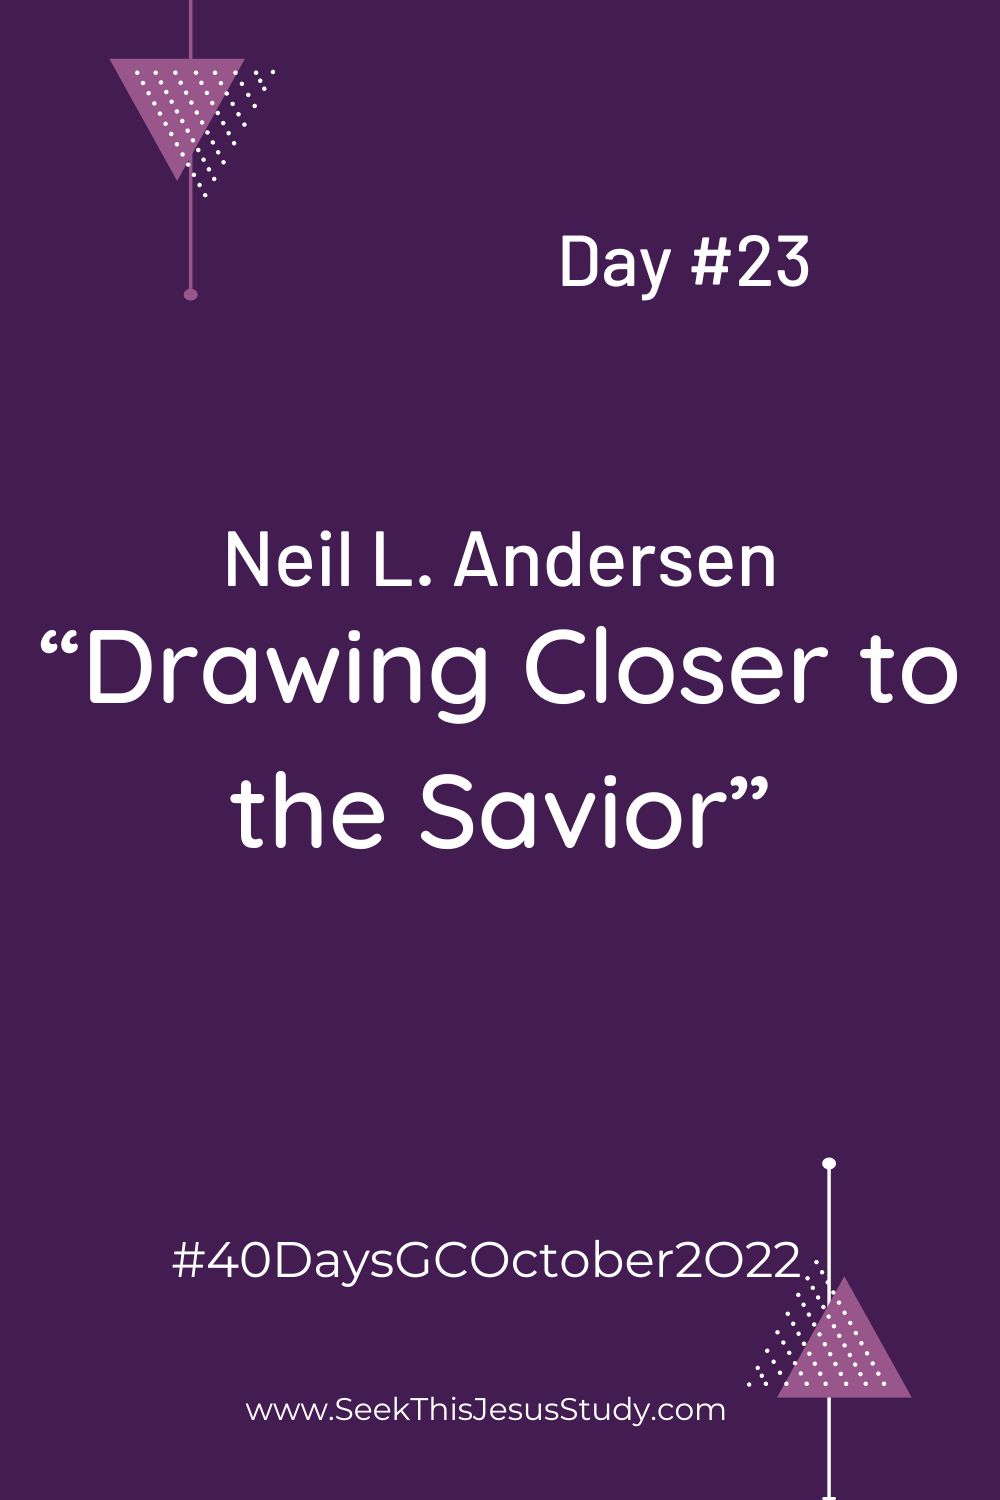 “Drawing Closer to the Savior” by Neil L. Andersen Seek This Jesus Study